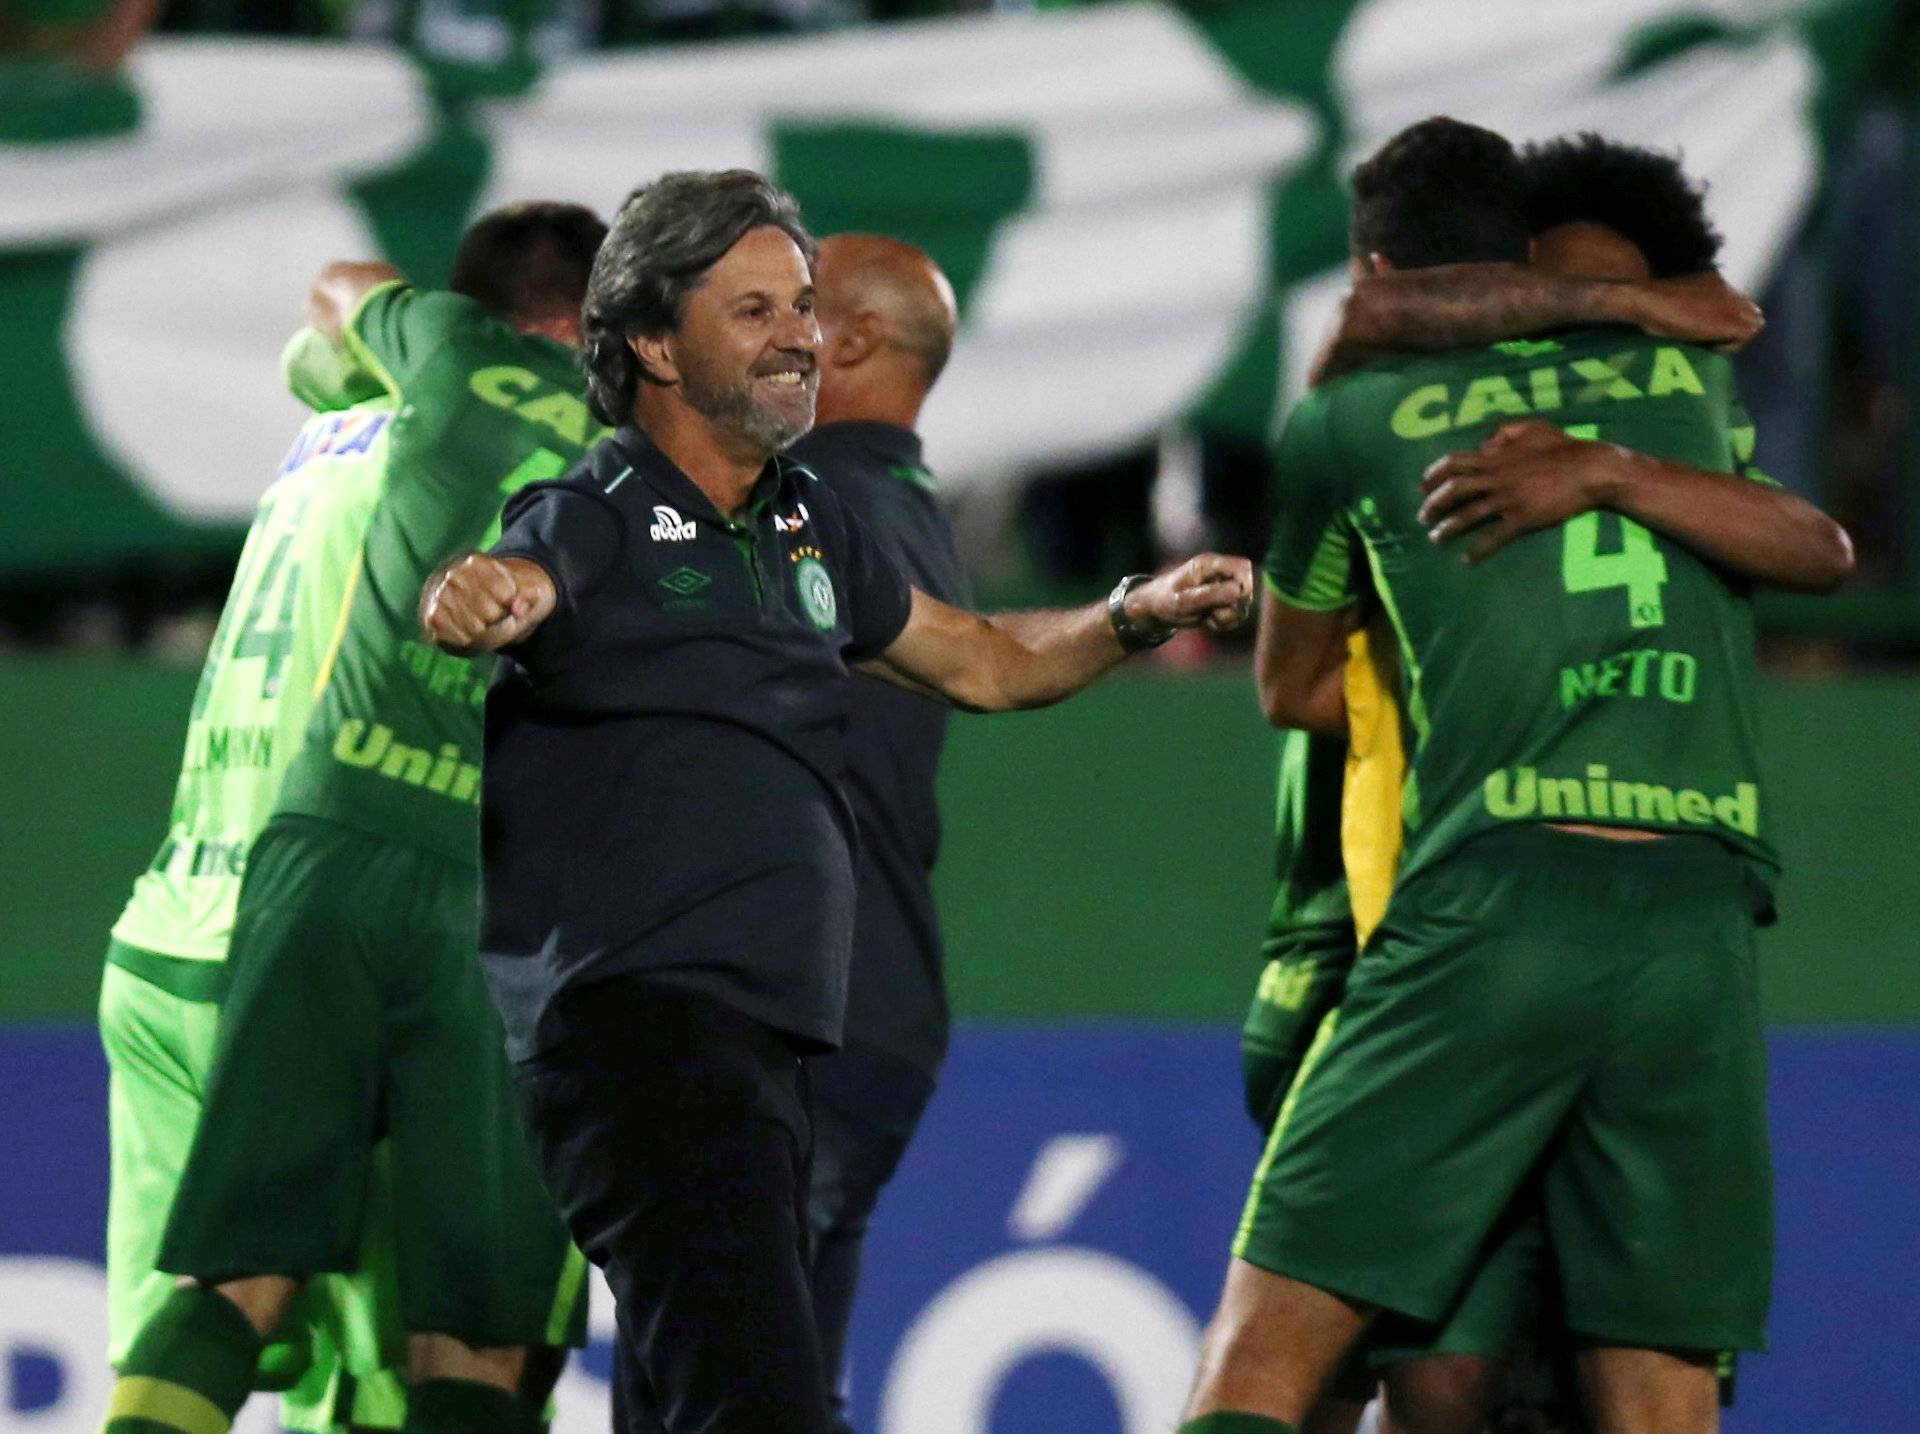 File picture of head coach Caio Junior of Chapecoense celebrating with his players after their match against San Lorenzo  in the Copa Sudamericana at the Arena Conda stadium in Chapeco